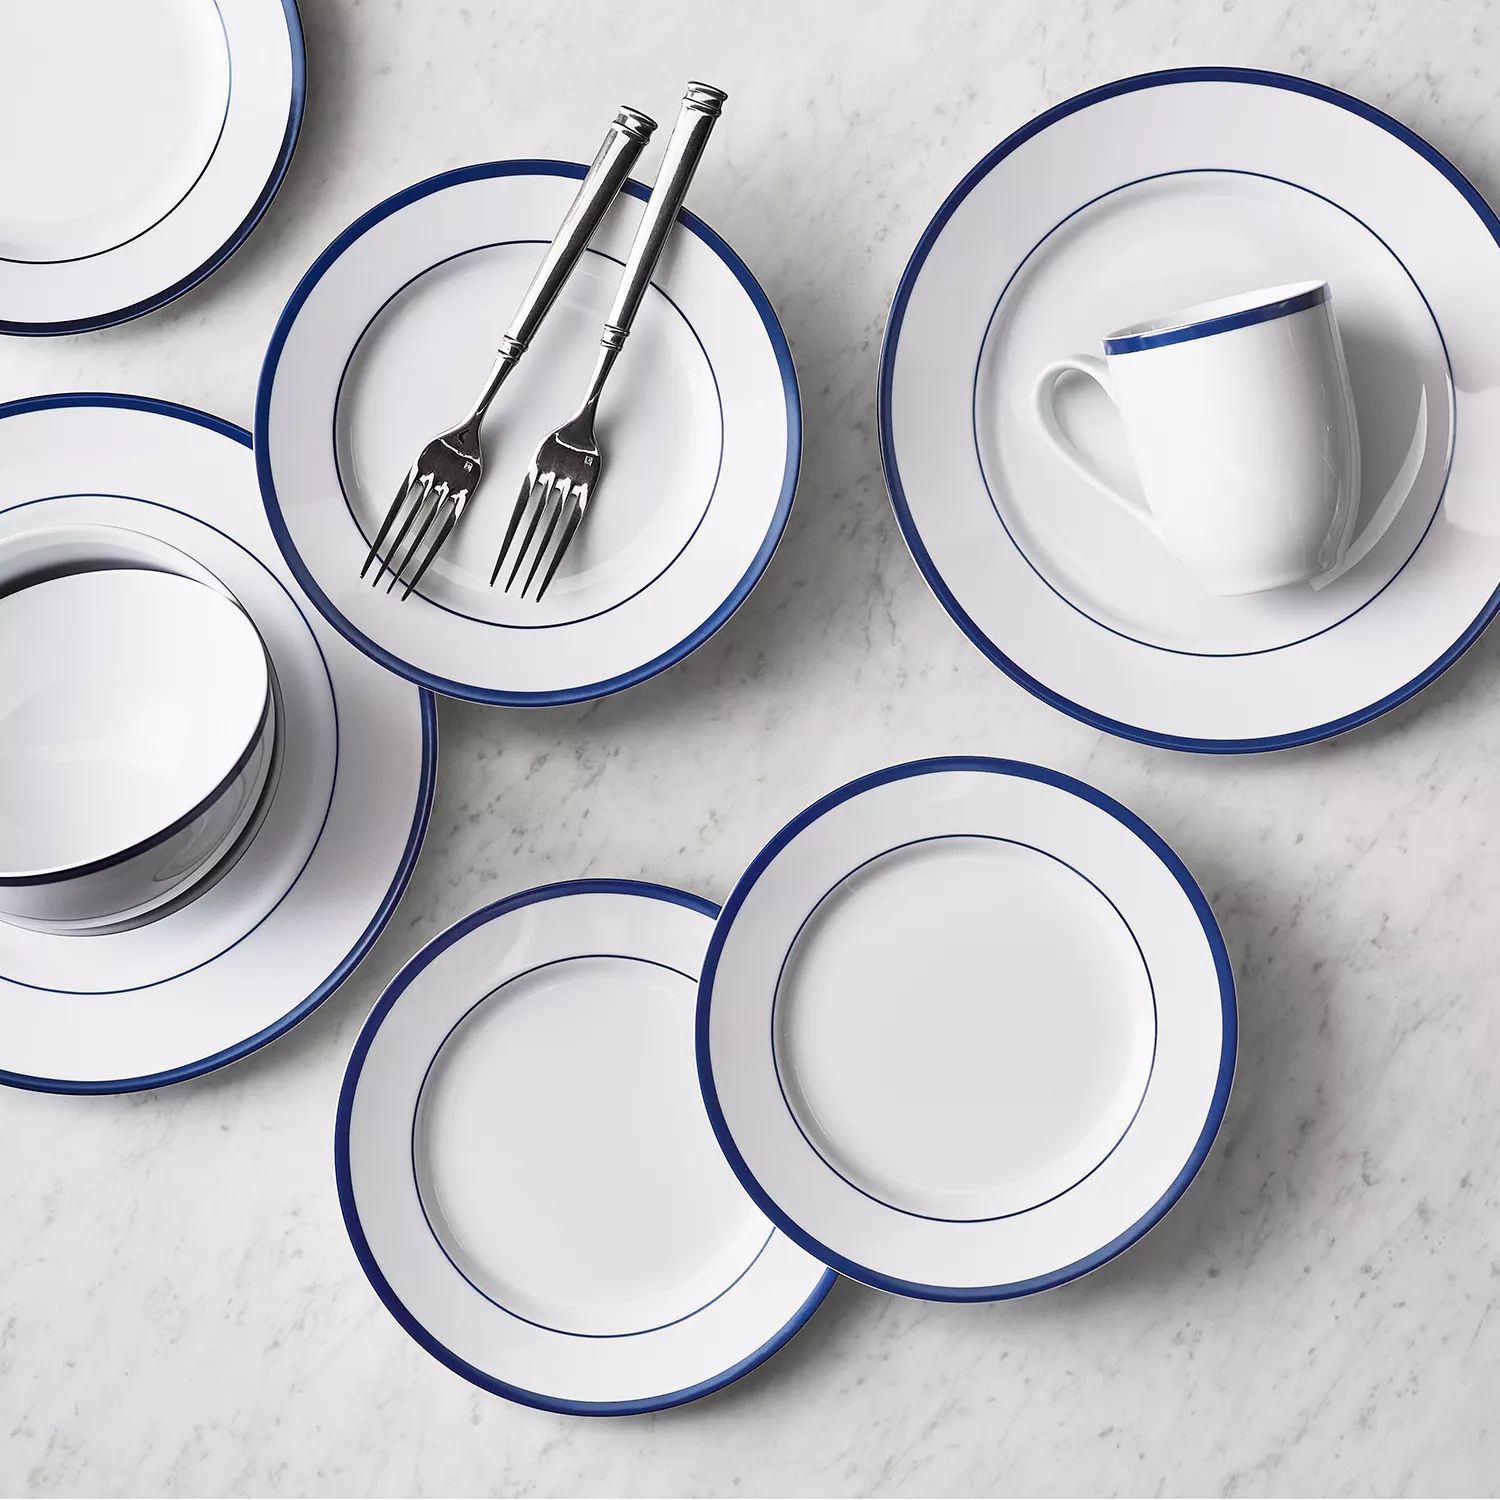 16 Serving Dishes We Love, Starting at $19